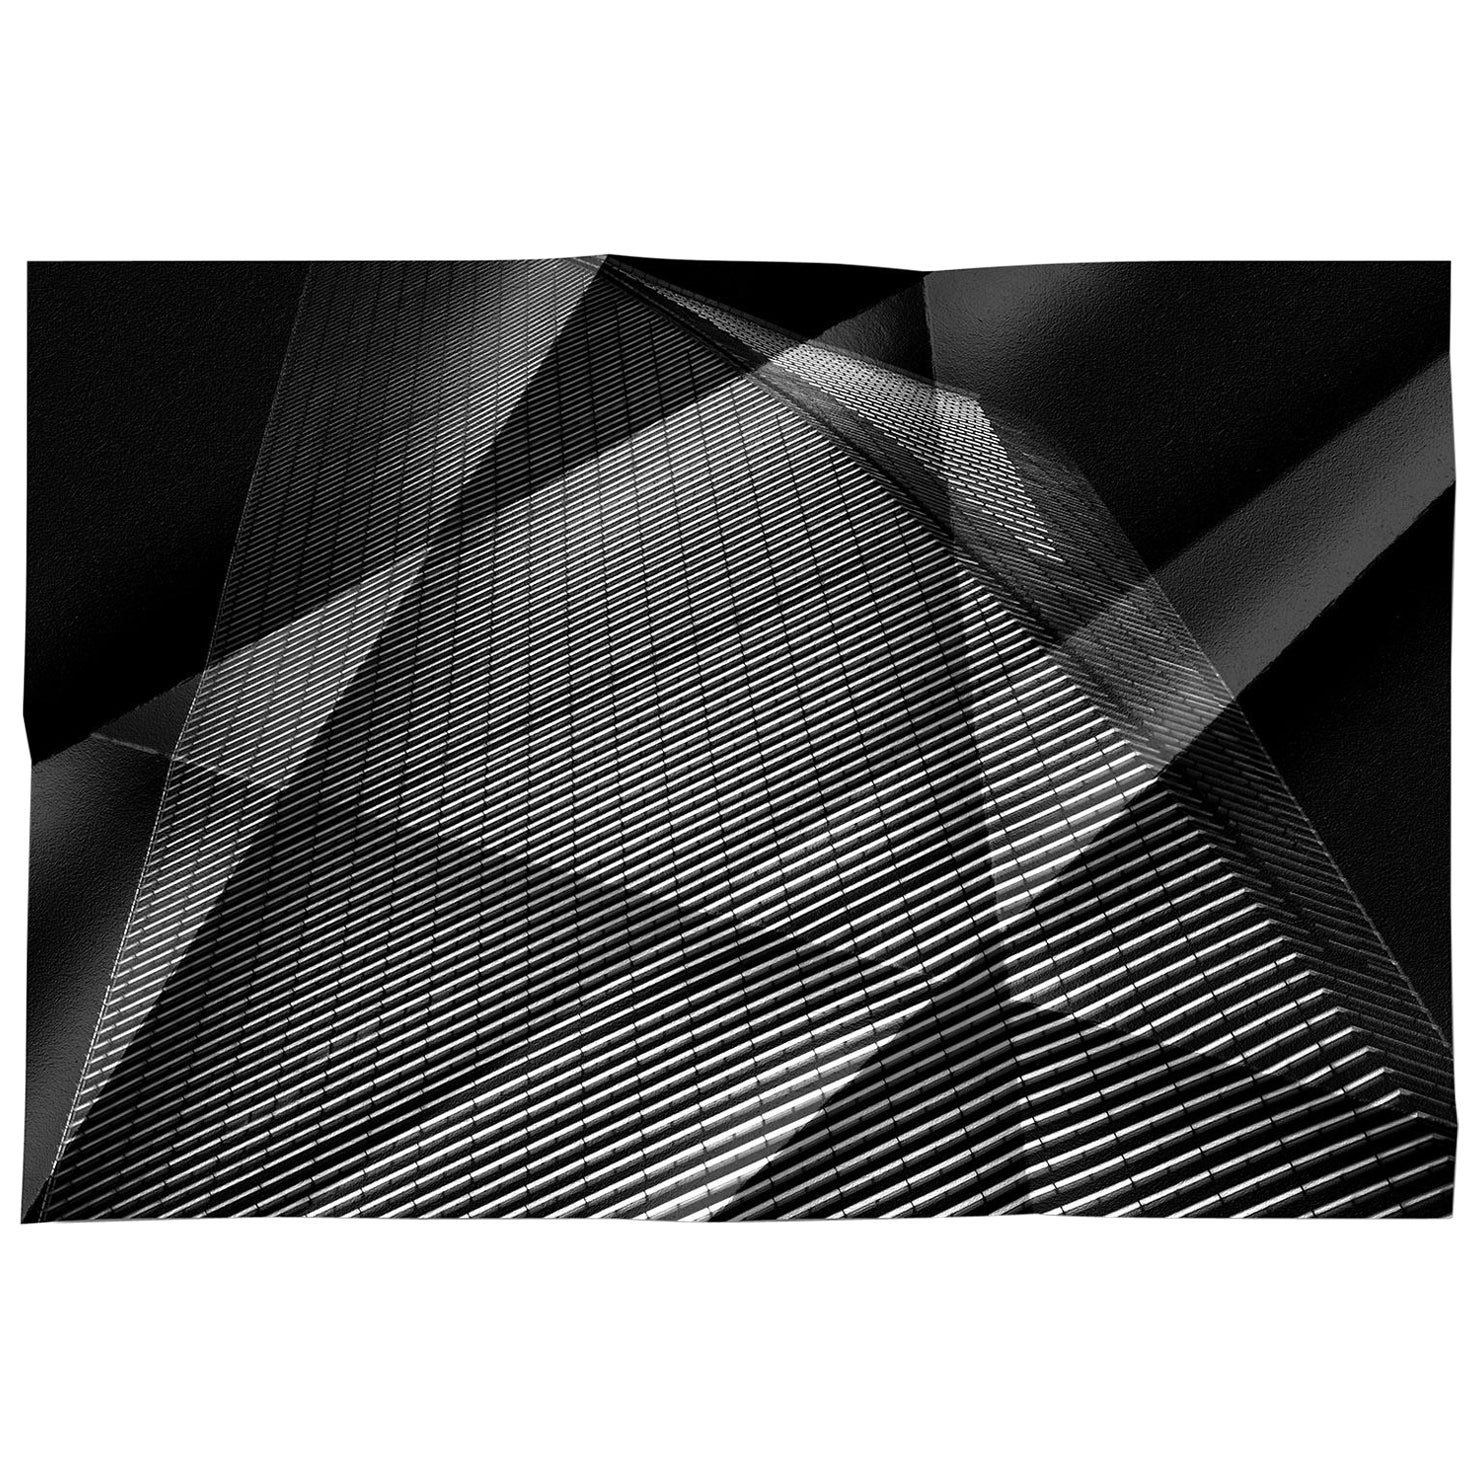 Michael Banks Black and White Photograph - Architectonic 3- Signed Limited edition abstract print, Large format contemporary